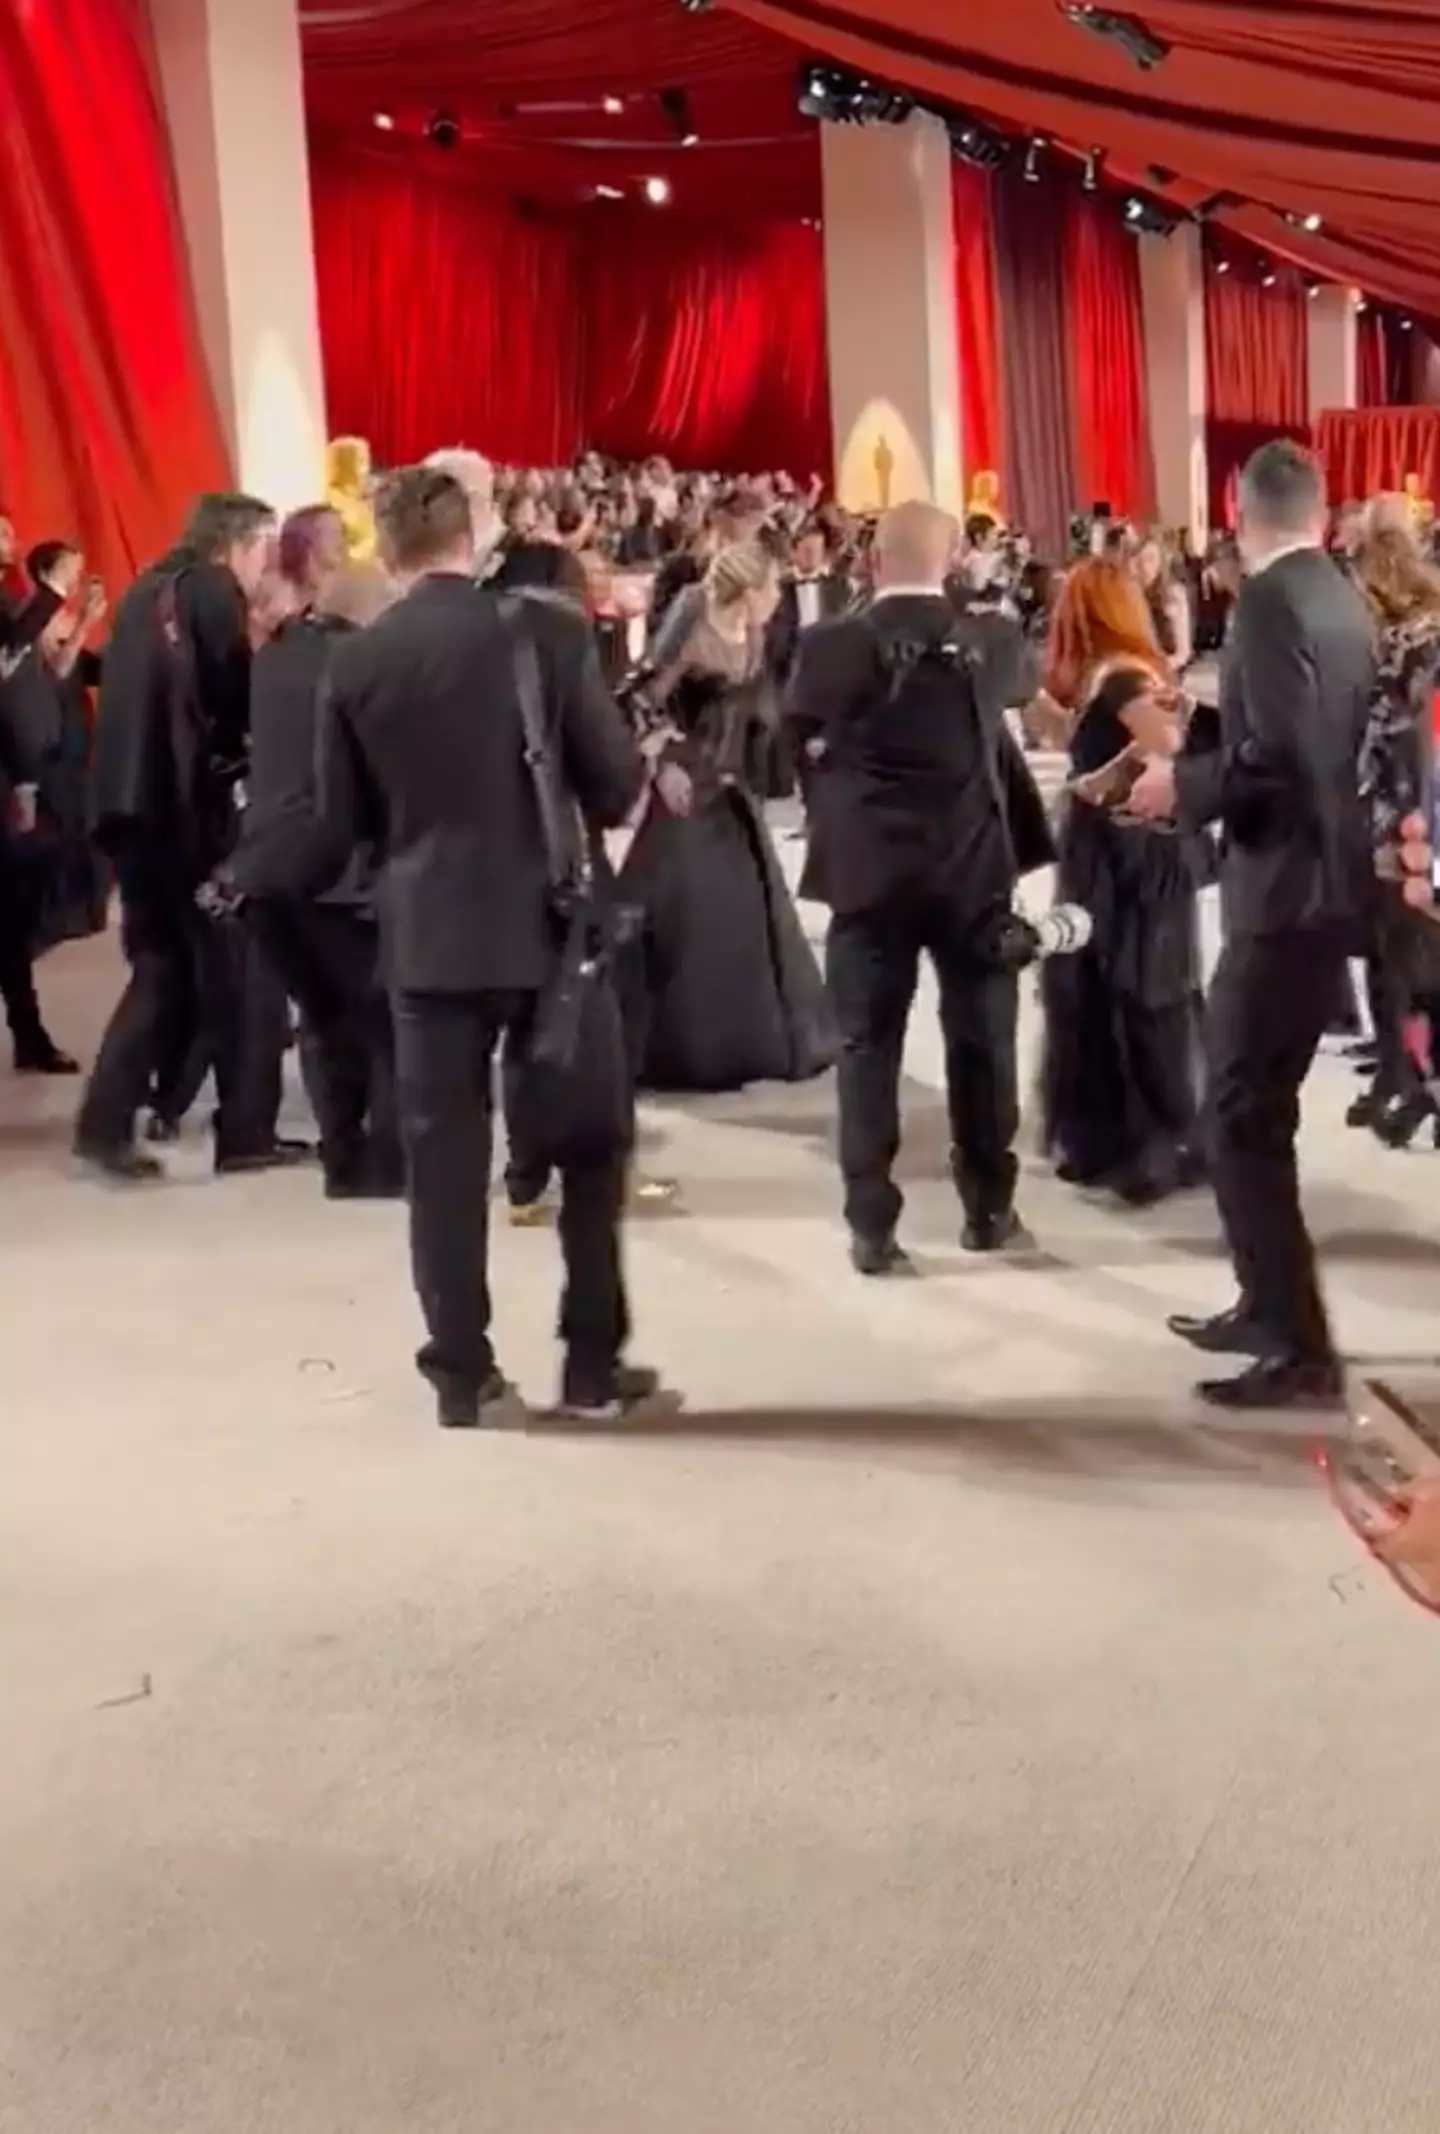 Gaga rushed back to help the photographer.